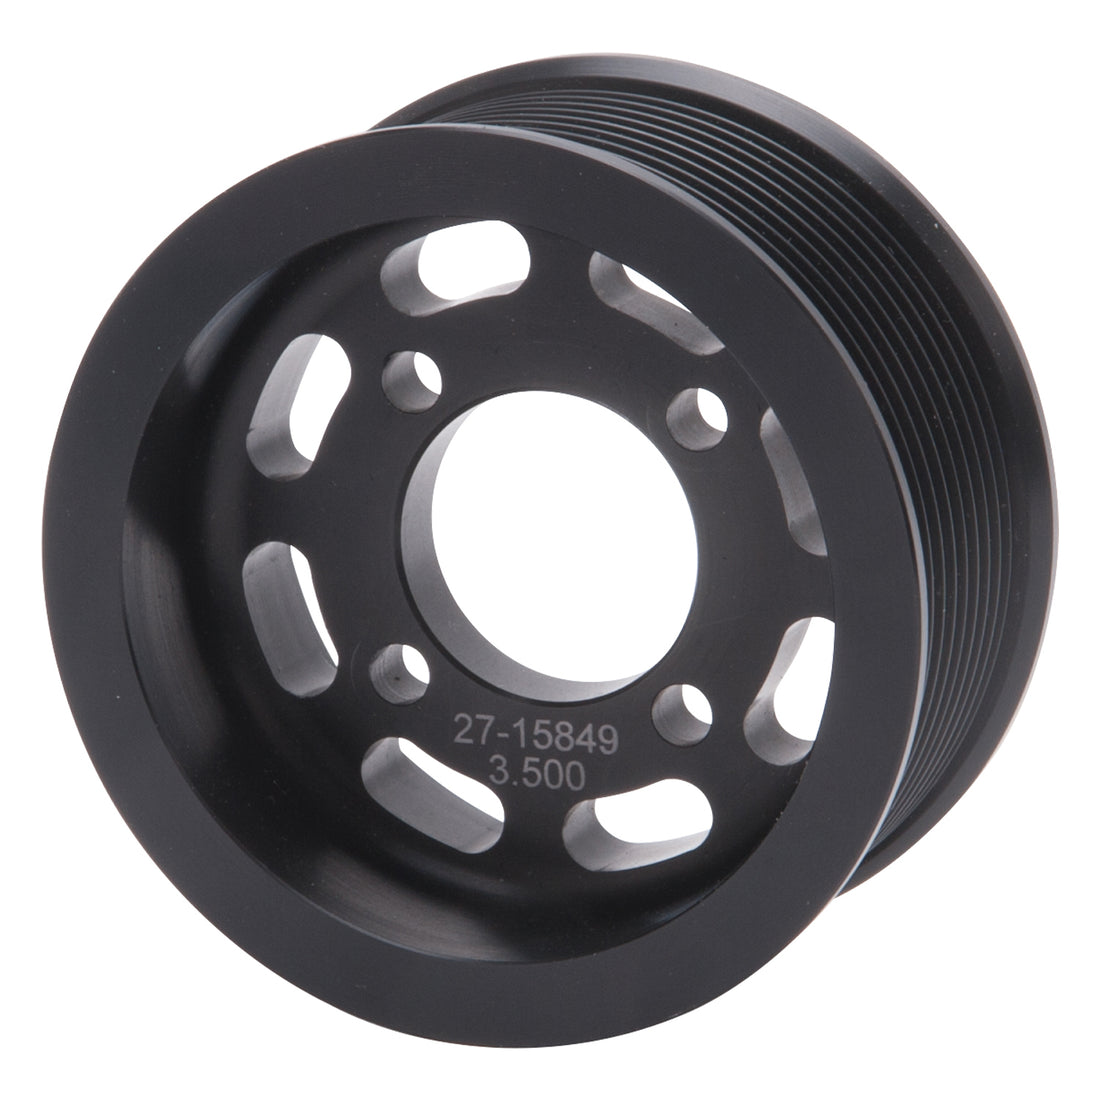 Edelbrock Competition Supercharger Pulley #15849 3.500 in. 10-Rib Black Anodized Edelbrock